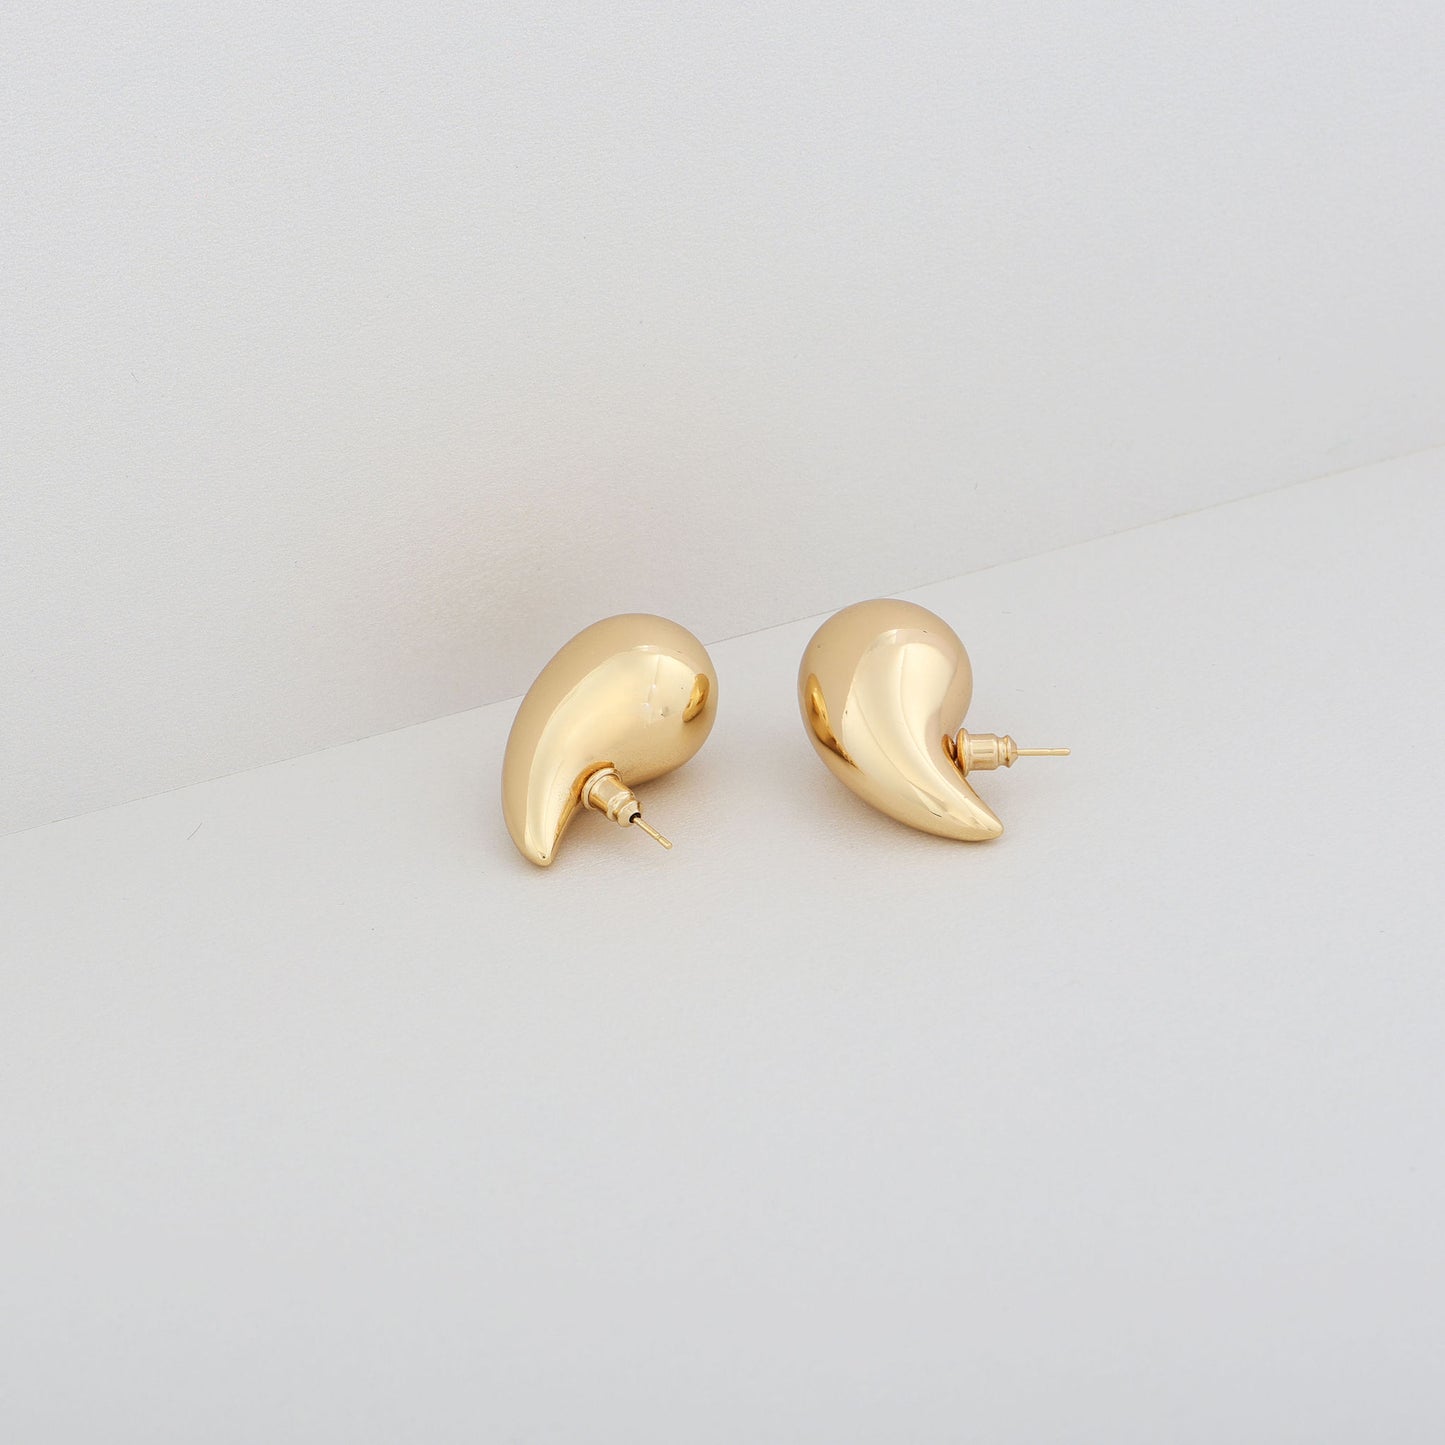 Stylish and minimalist dome earrings in gold or silver